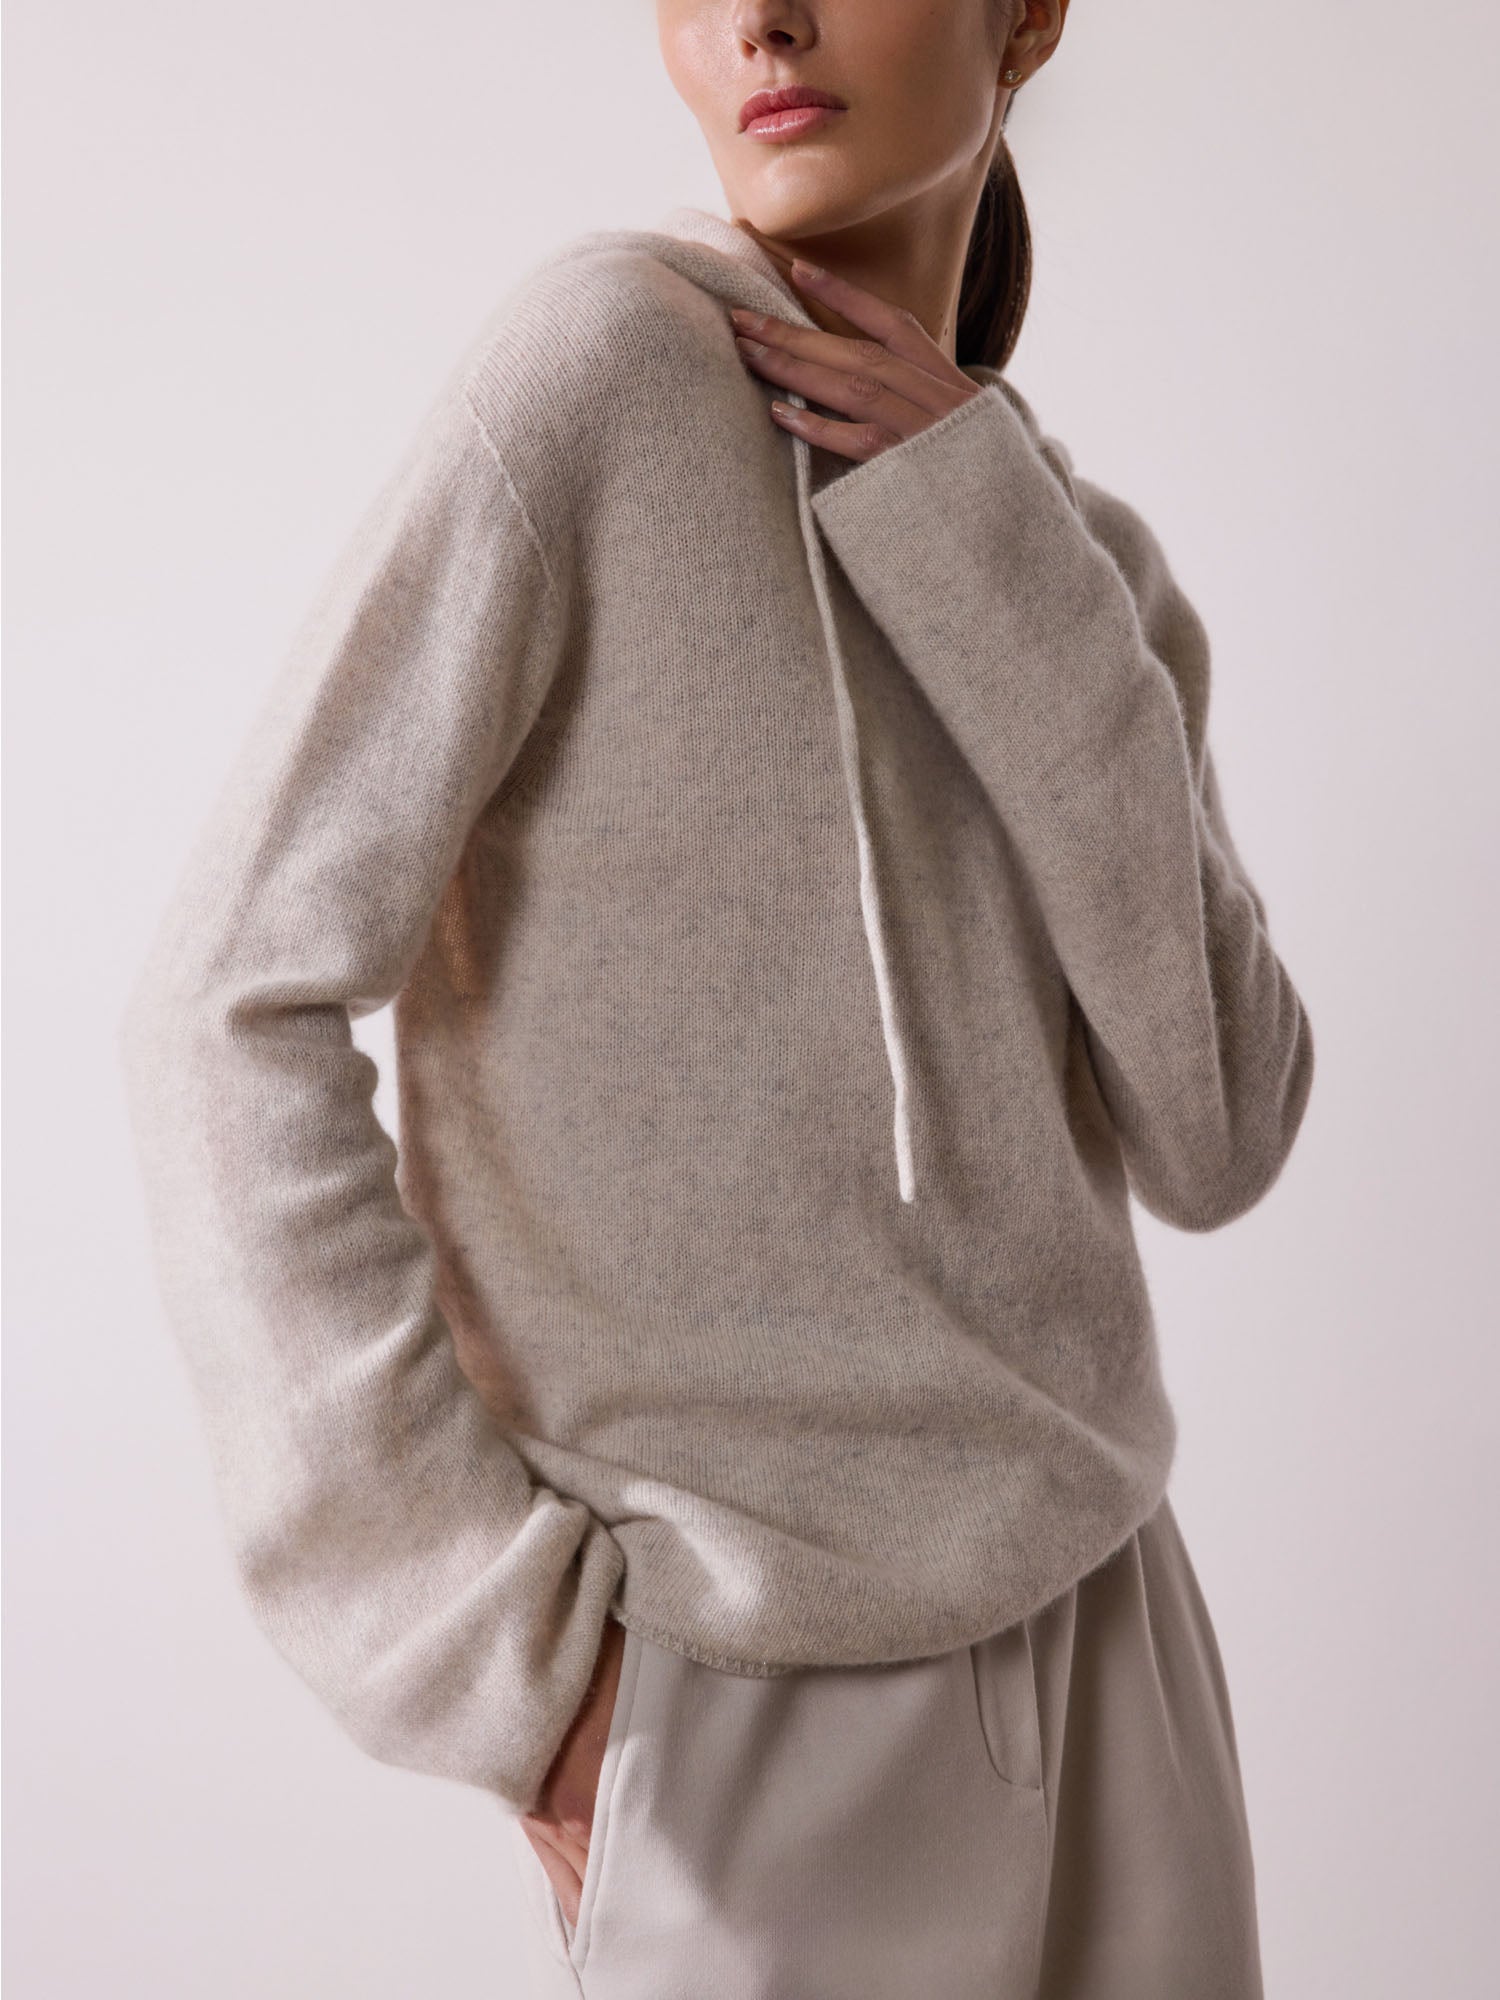 Cashmere beige hoodie sweater side view